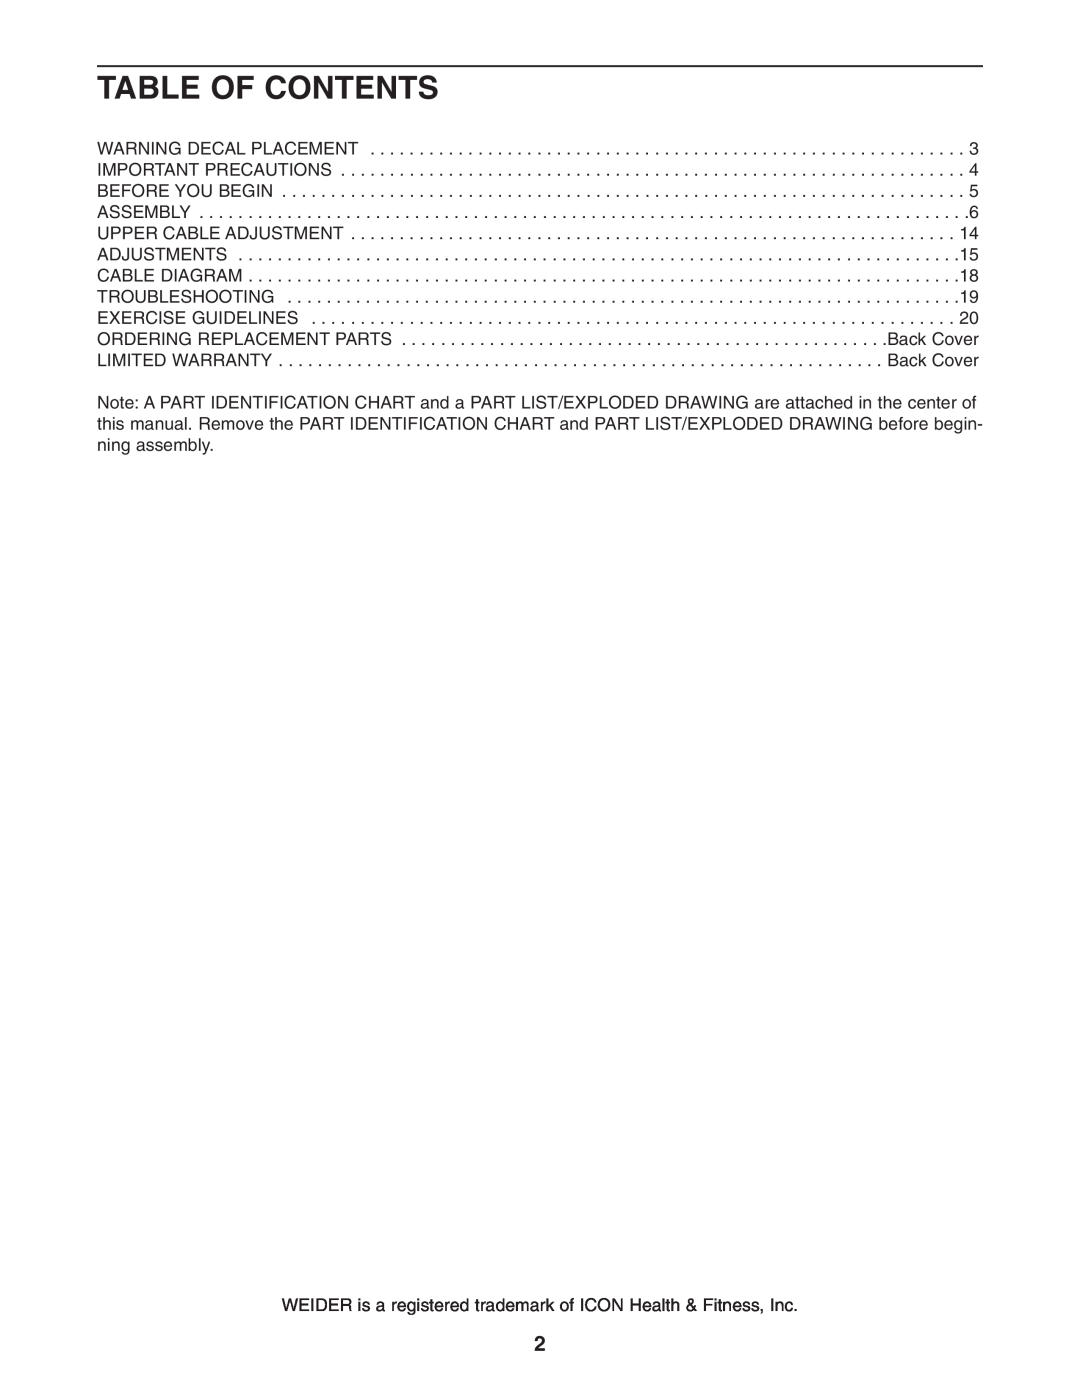 Weider WESY68632 user manual Table Of Contents, WEIDER is a registered trademark of ICON Health & Fitness, Inc 